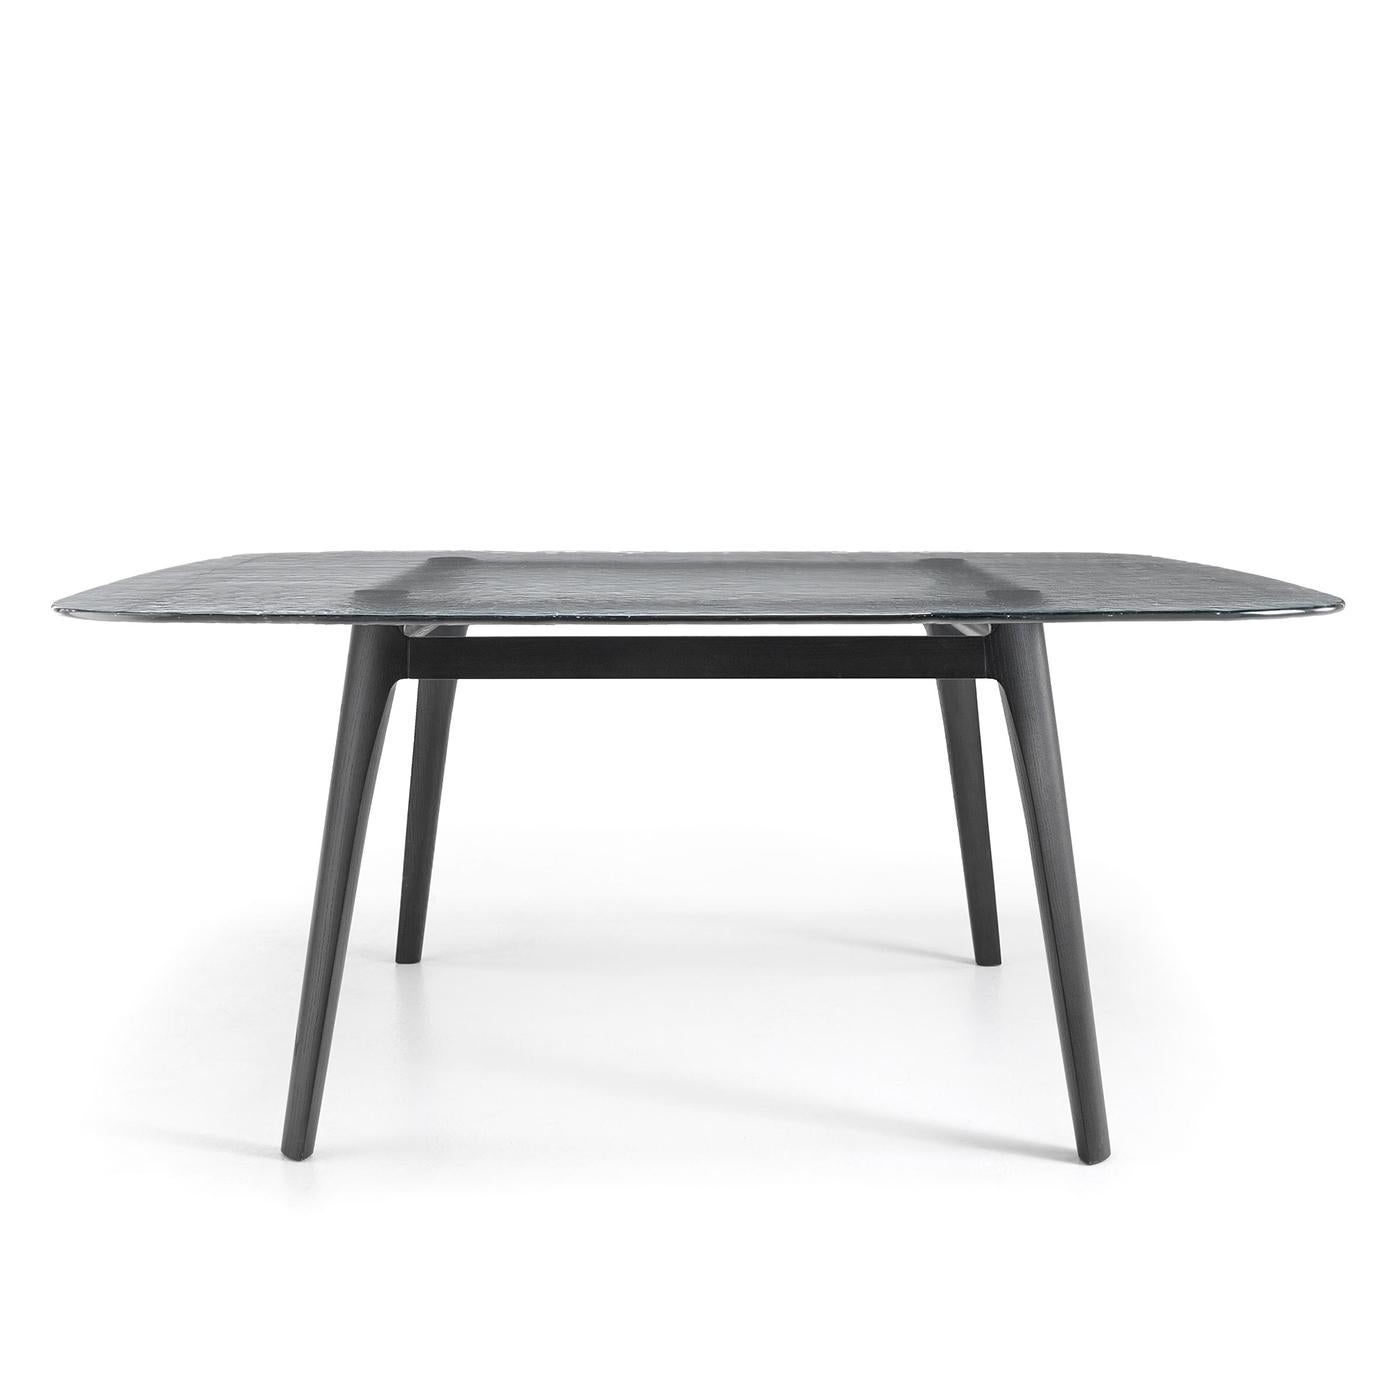 Dining table Estamp with structure in solid oak
in grey finish. With tempered and fused glass top,
15mm thickness, in smoke grey finish.
Also available with structure in solid oak in natural finish.
Also available with glass top in amber, natural